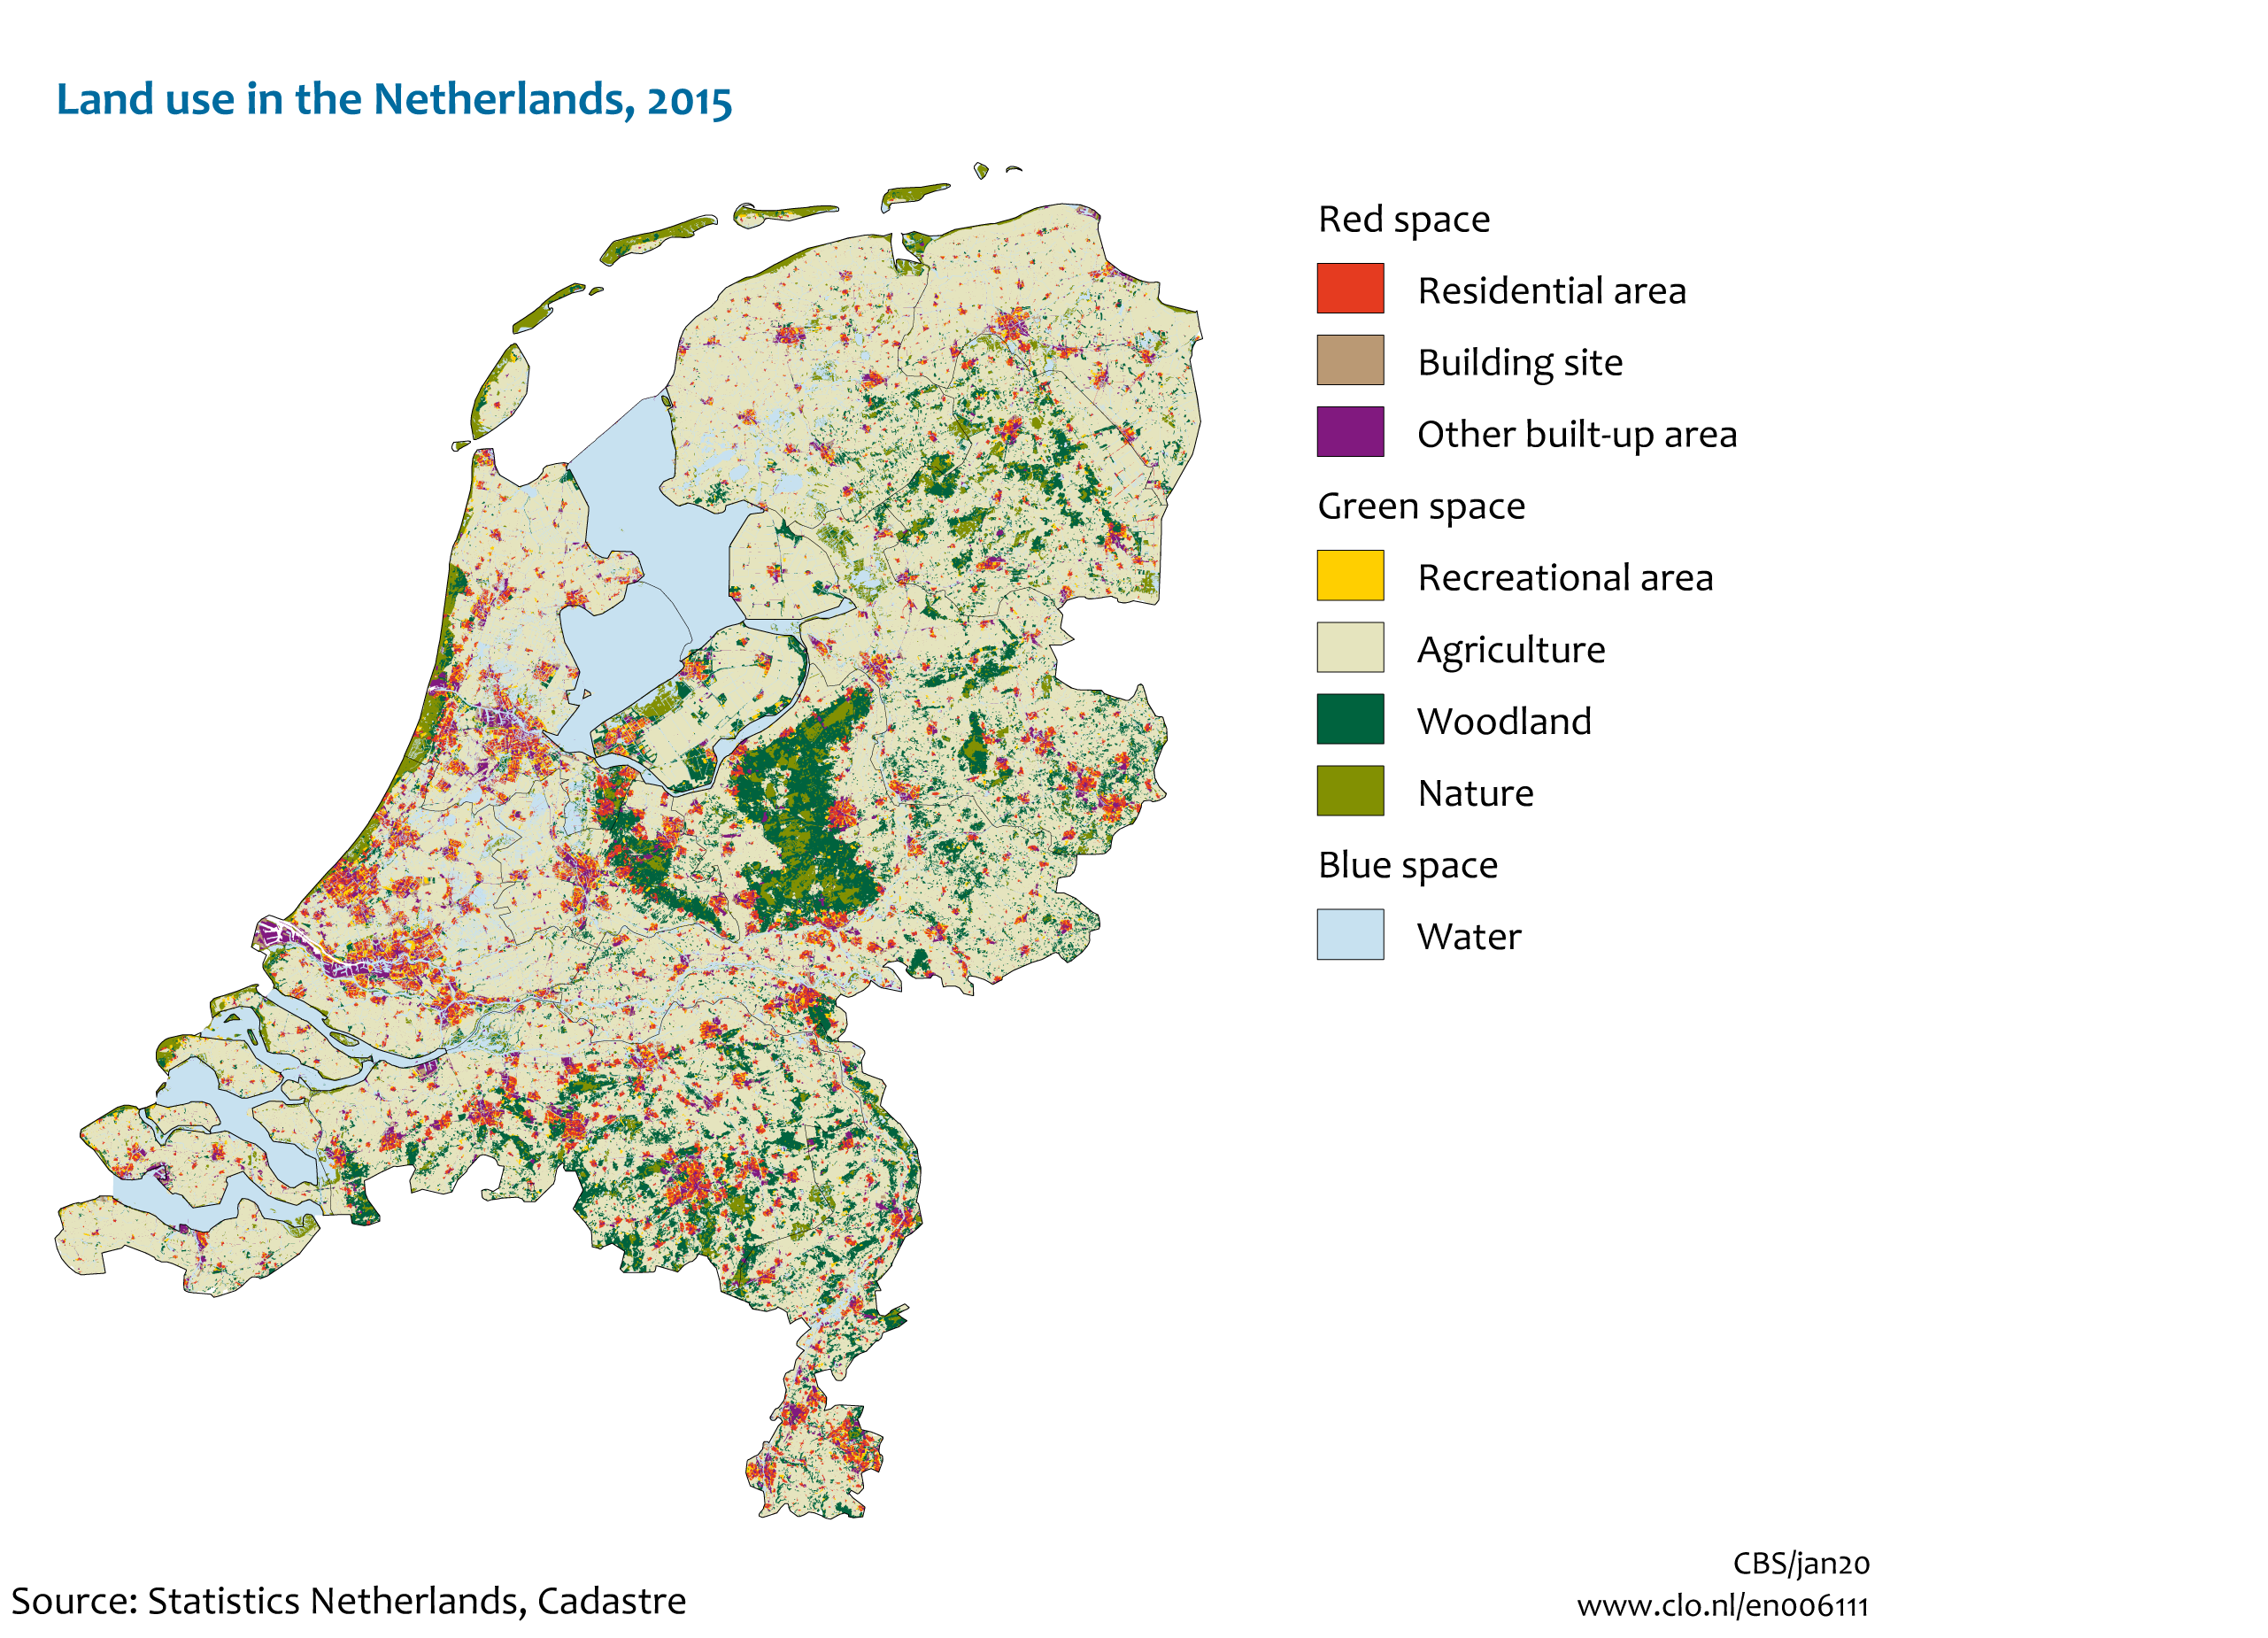 Image Land use in the Netherlands, 2015. The image is further explained in the text.